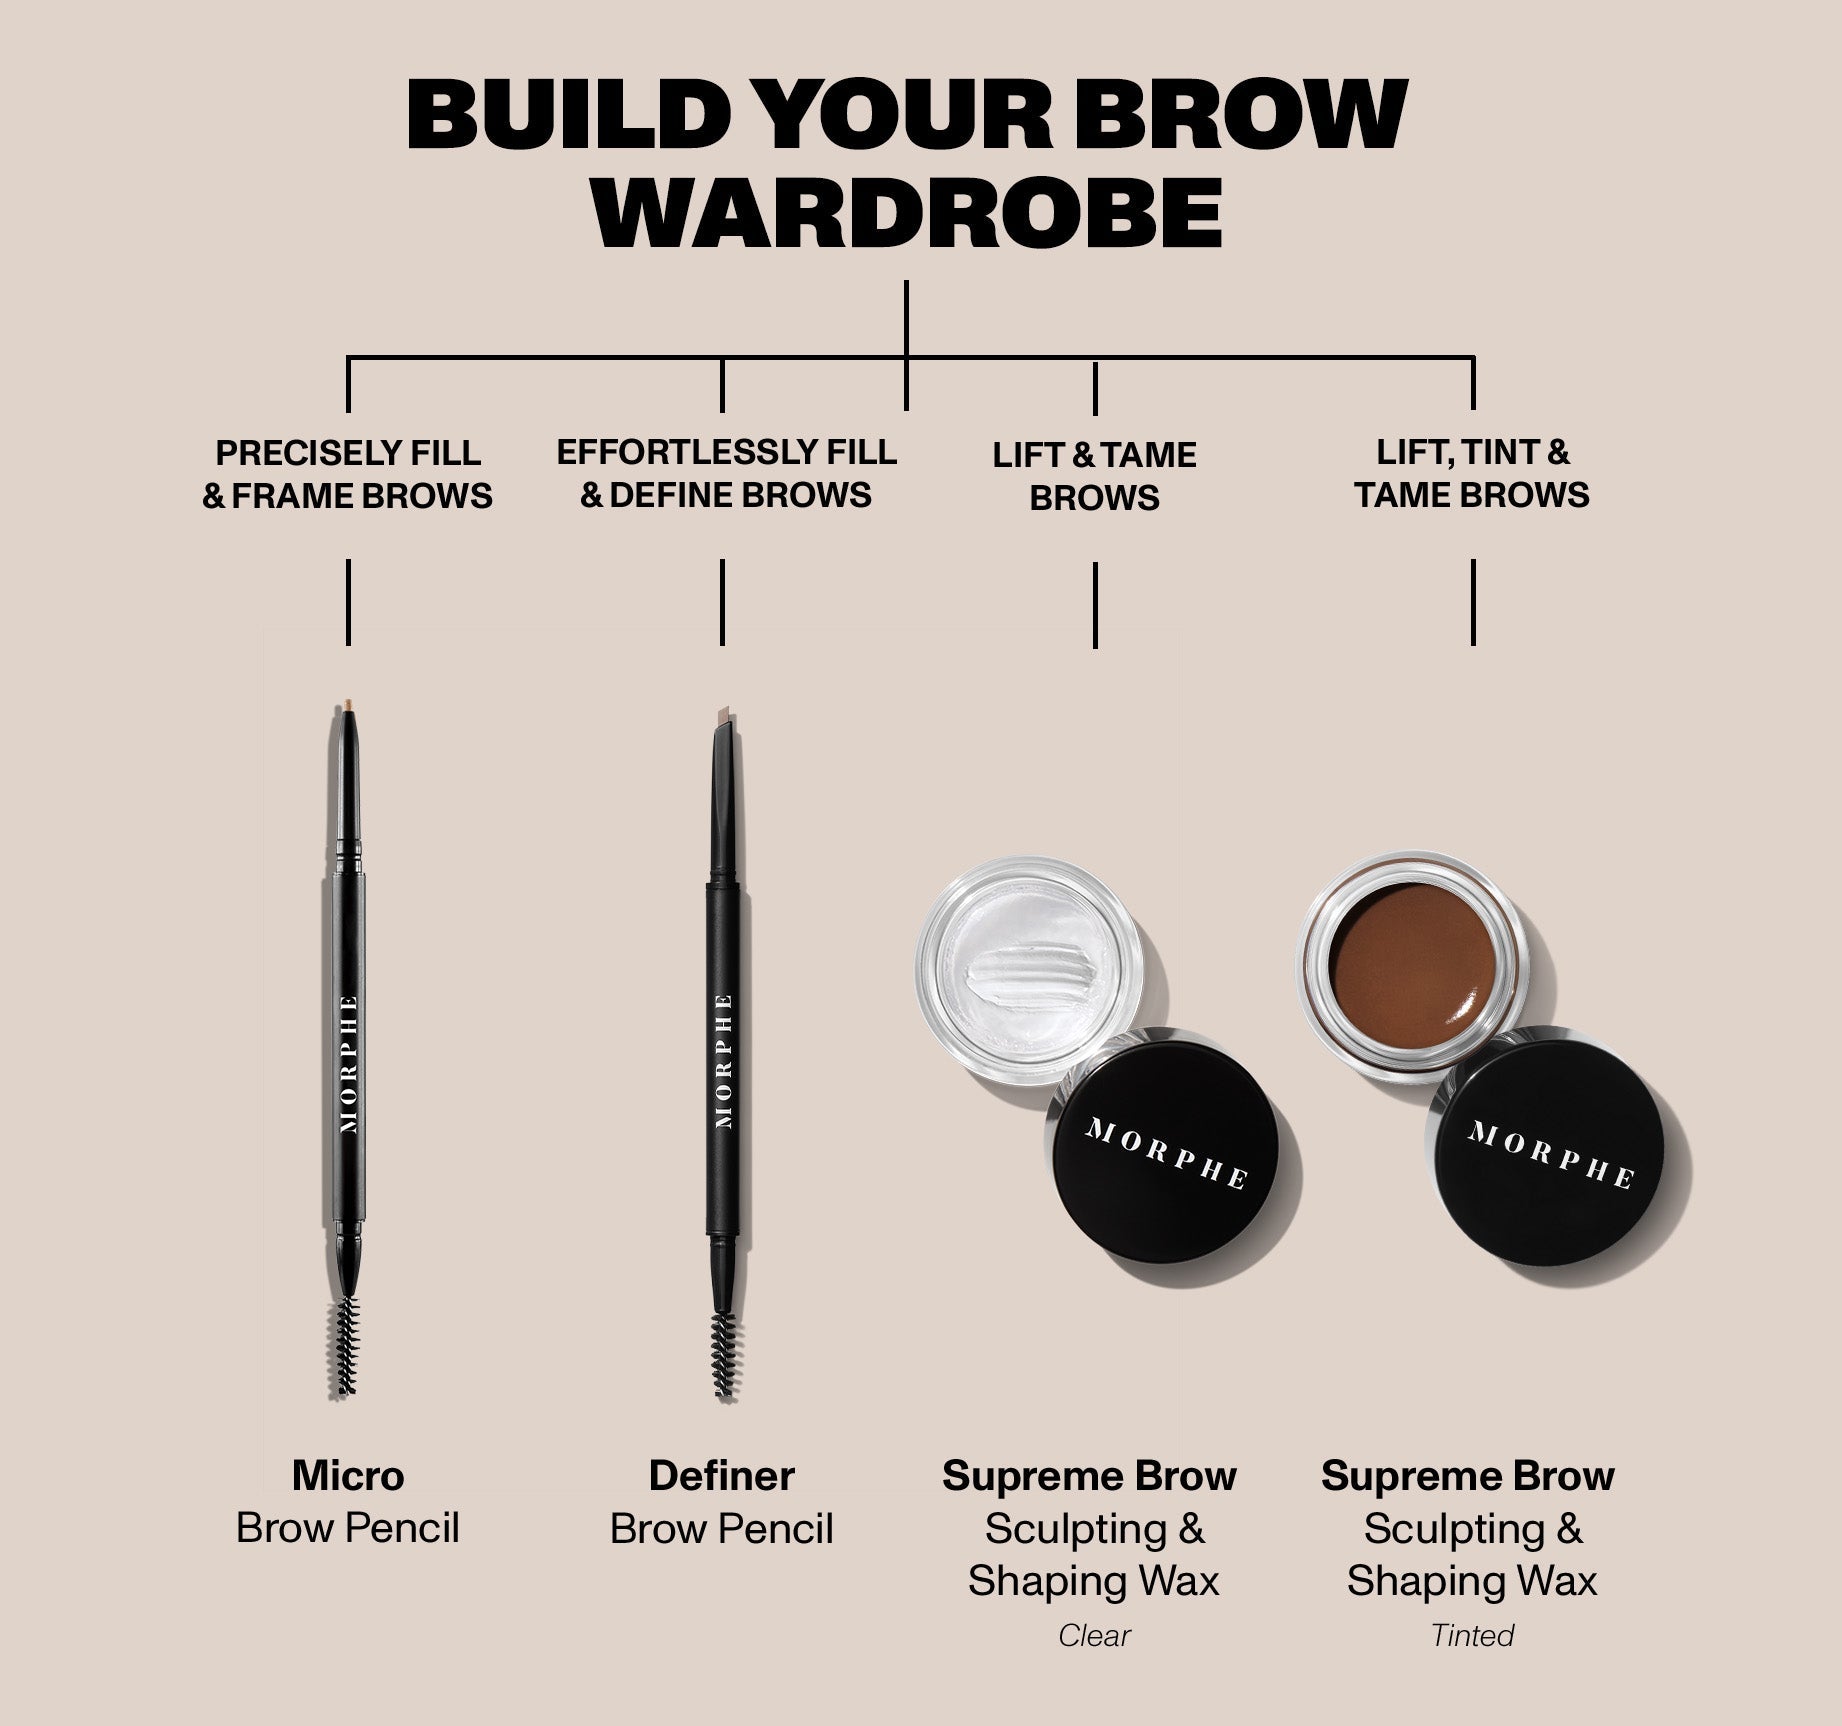 Supreme Brow Sculpting And Shaping Wax - Latte - Image 10